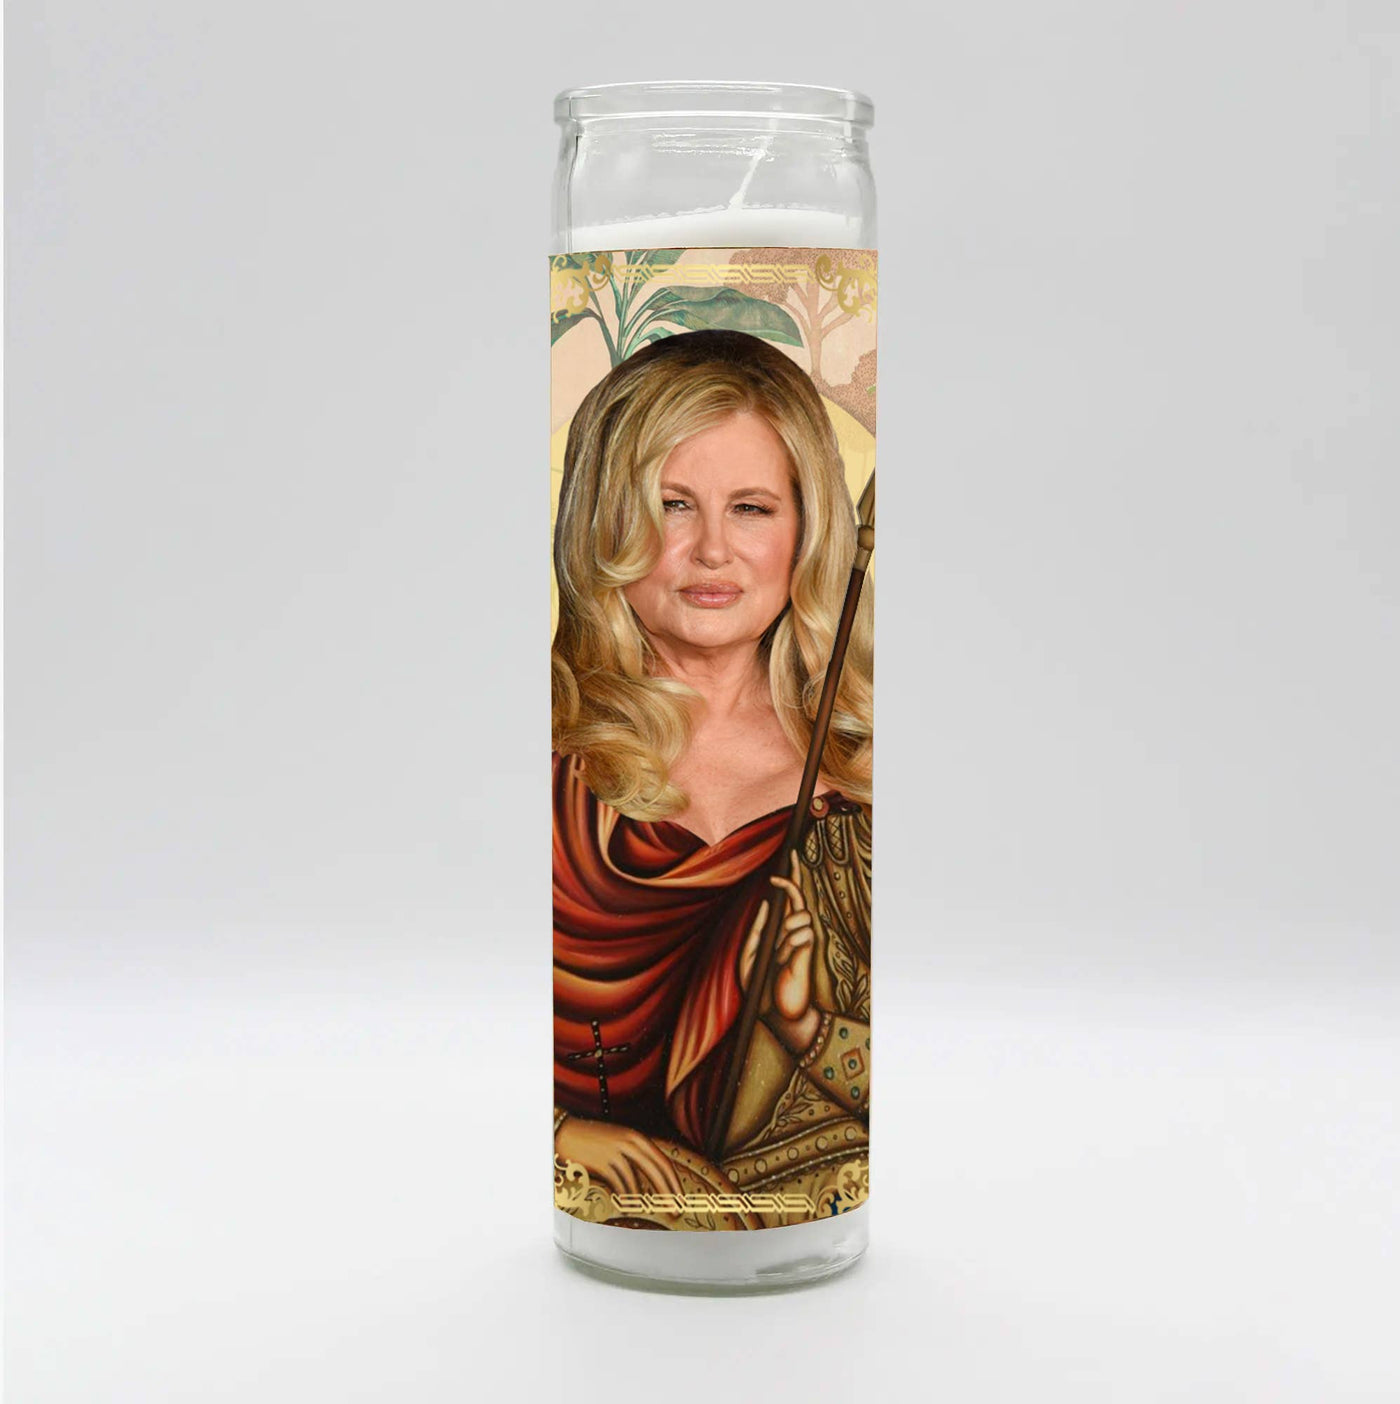 Saint Queen of White Lotus Candle- Jennifer Coolidge